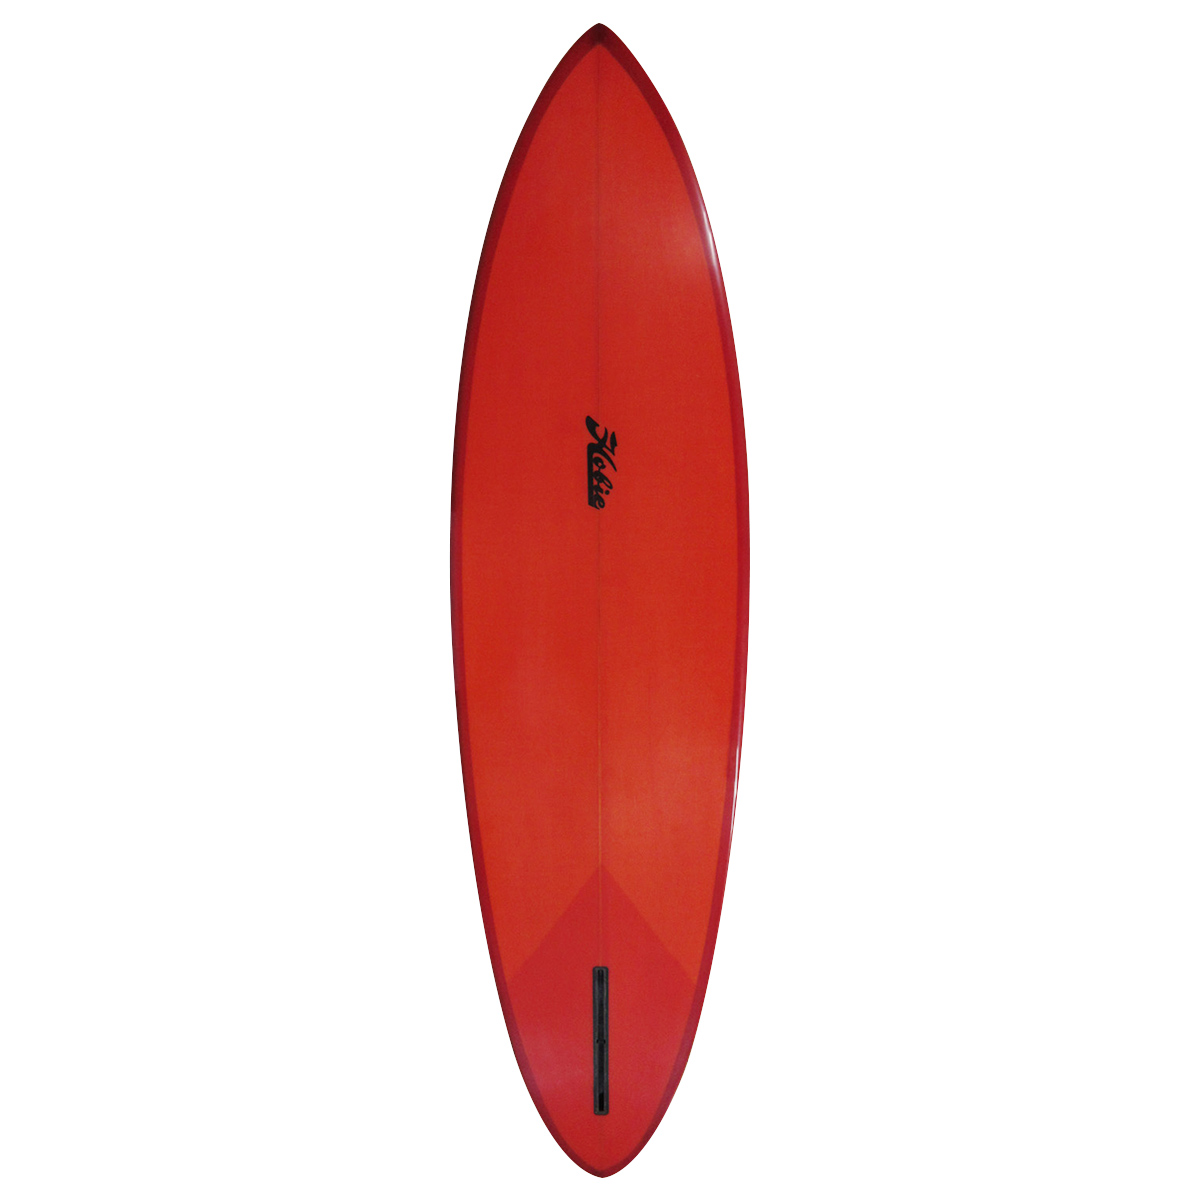 HOBIE / TW CHARGER 6'6 Shaped by Tyler Warren